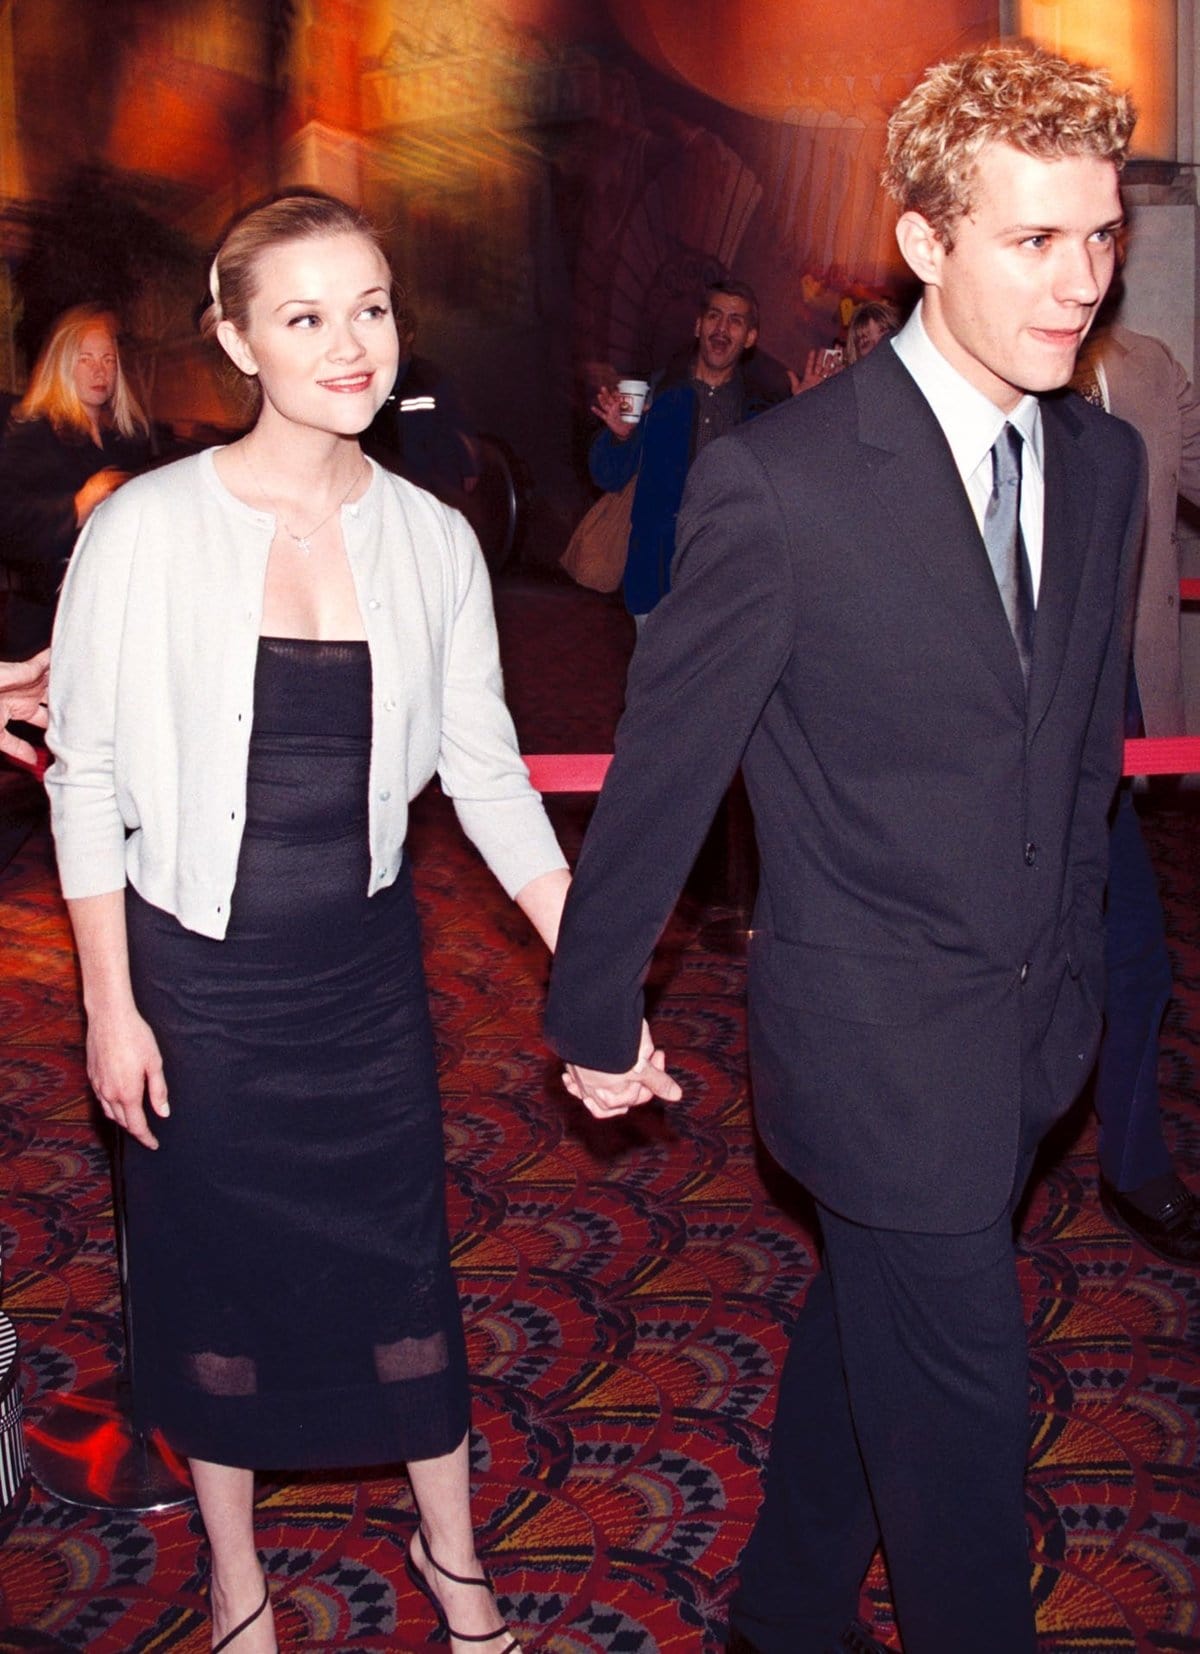 Ryan Phillippe and Reese Witherspoon started dating after meeting at her 21st birthday party in 1997